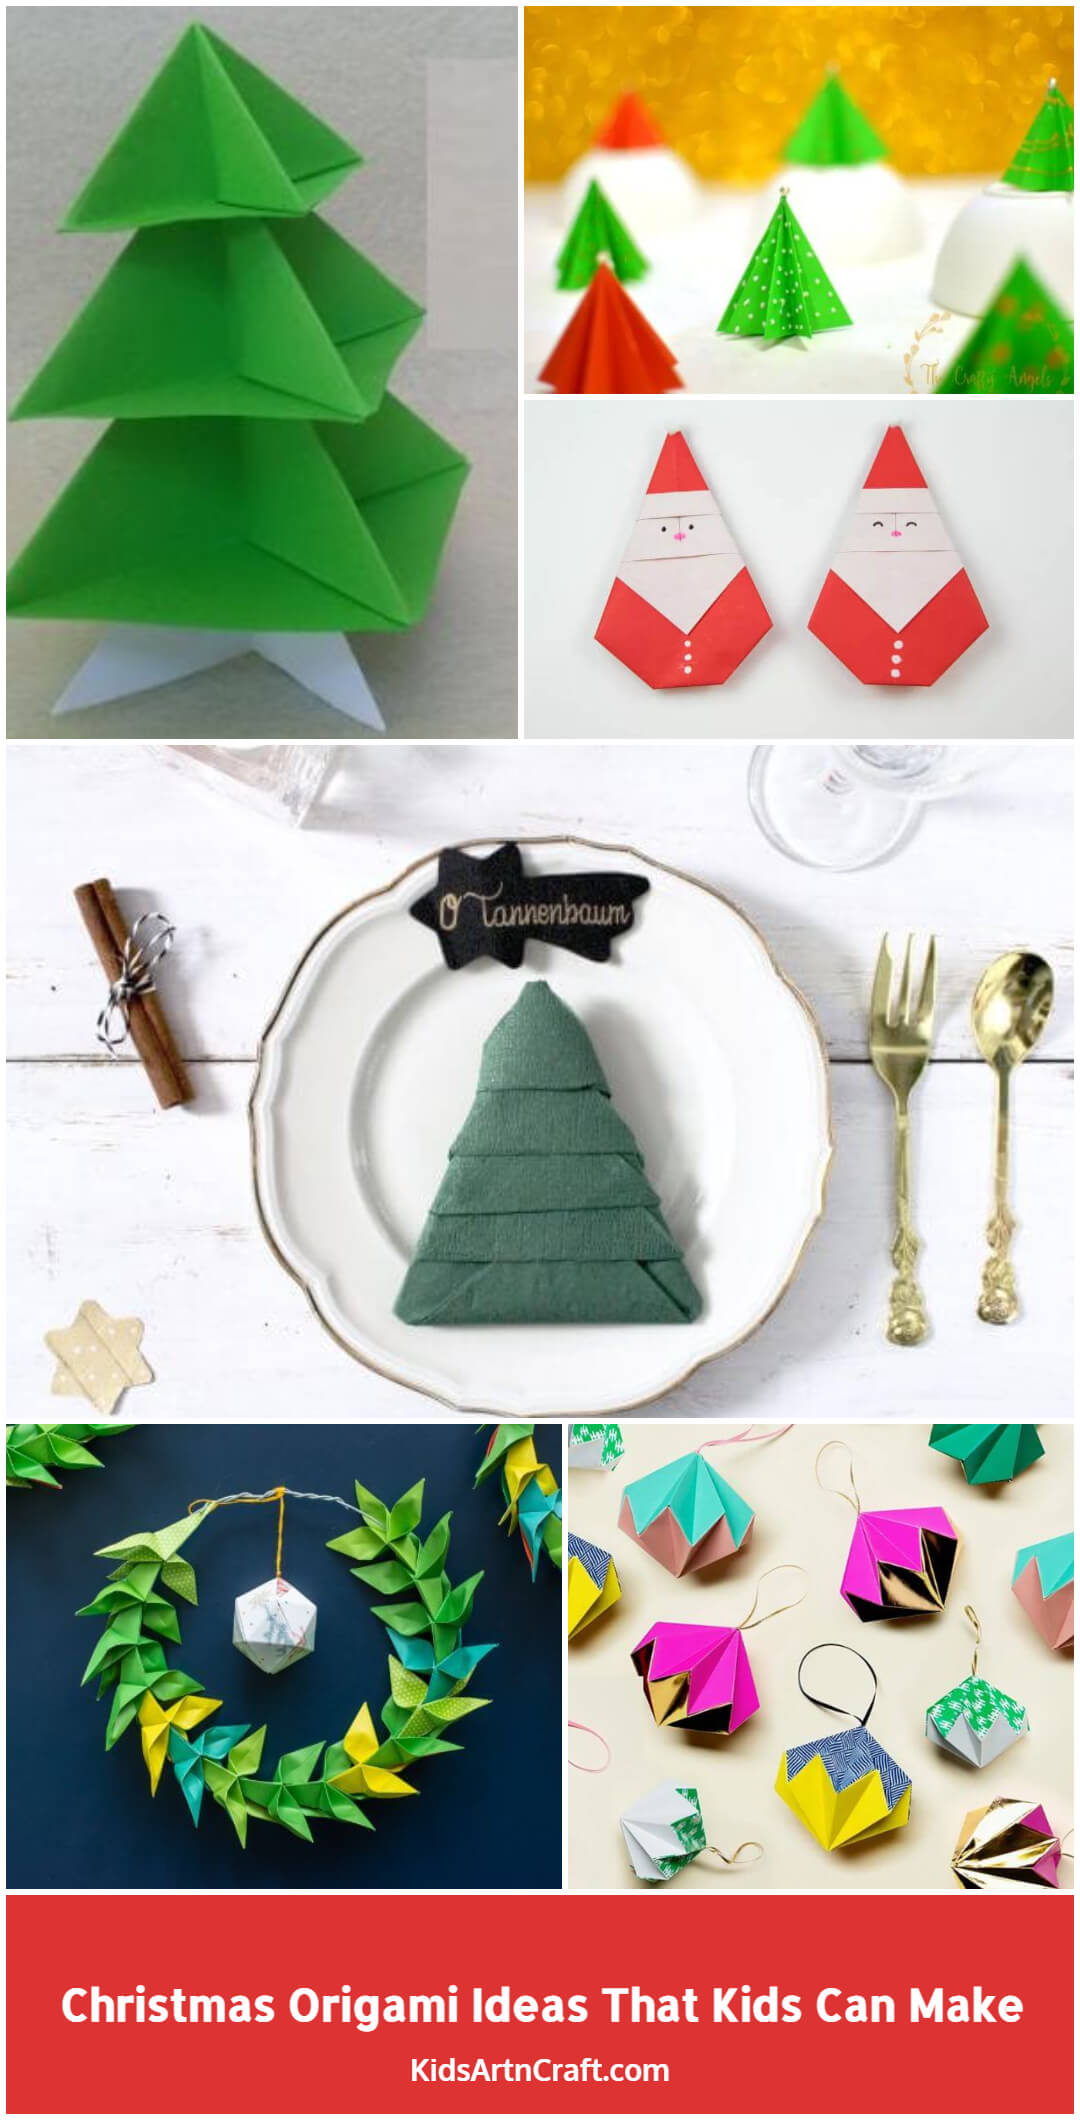  Christmas Origami Ideas That Kids Can Make